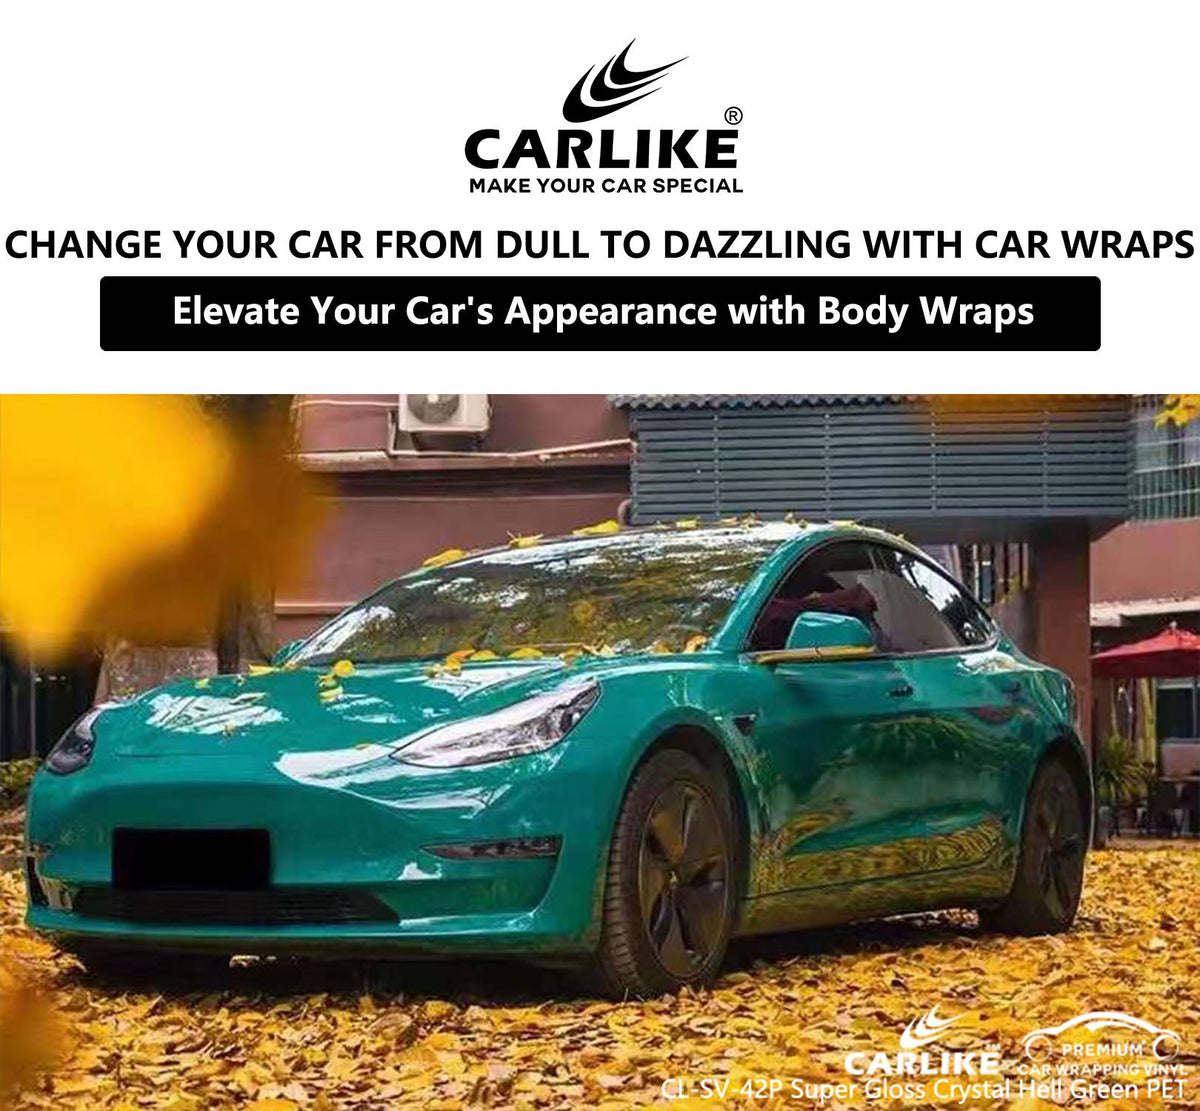 From Dull to Dazzling: Elevate Your Car's Appearance with Body